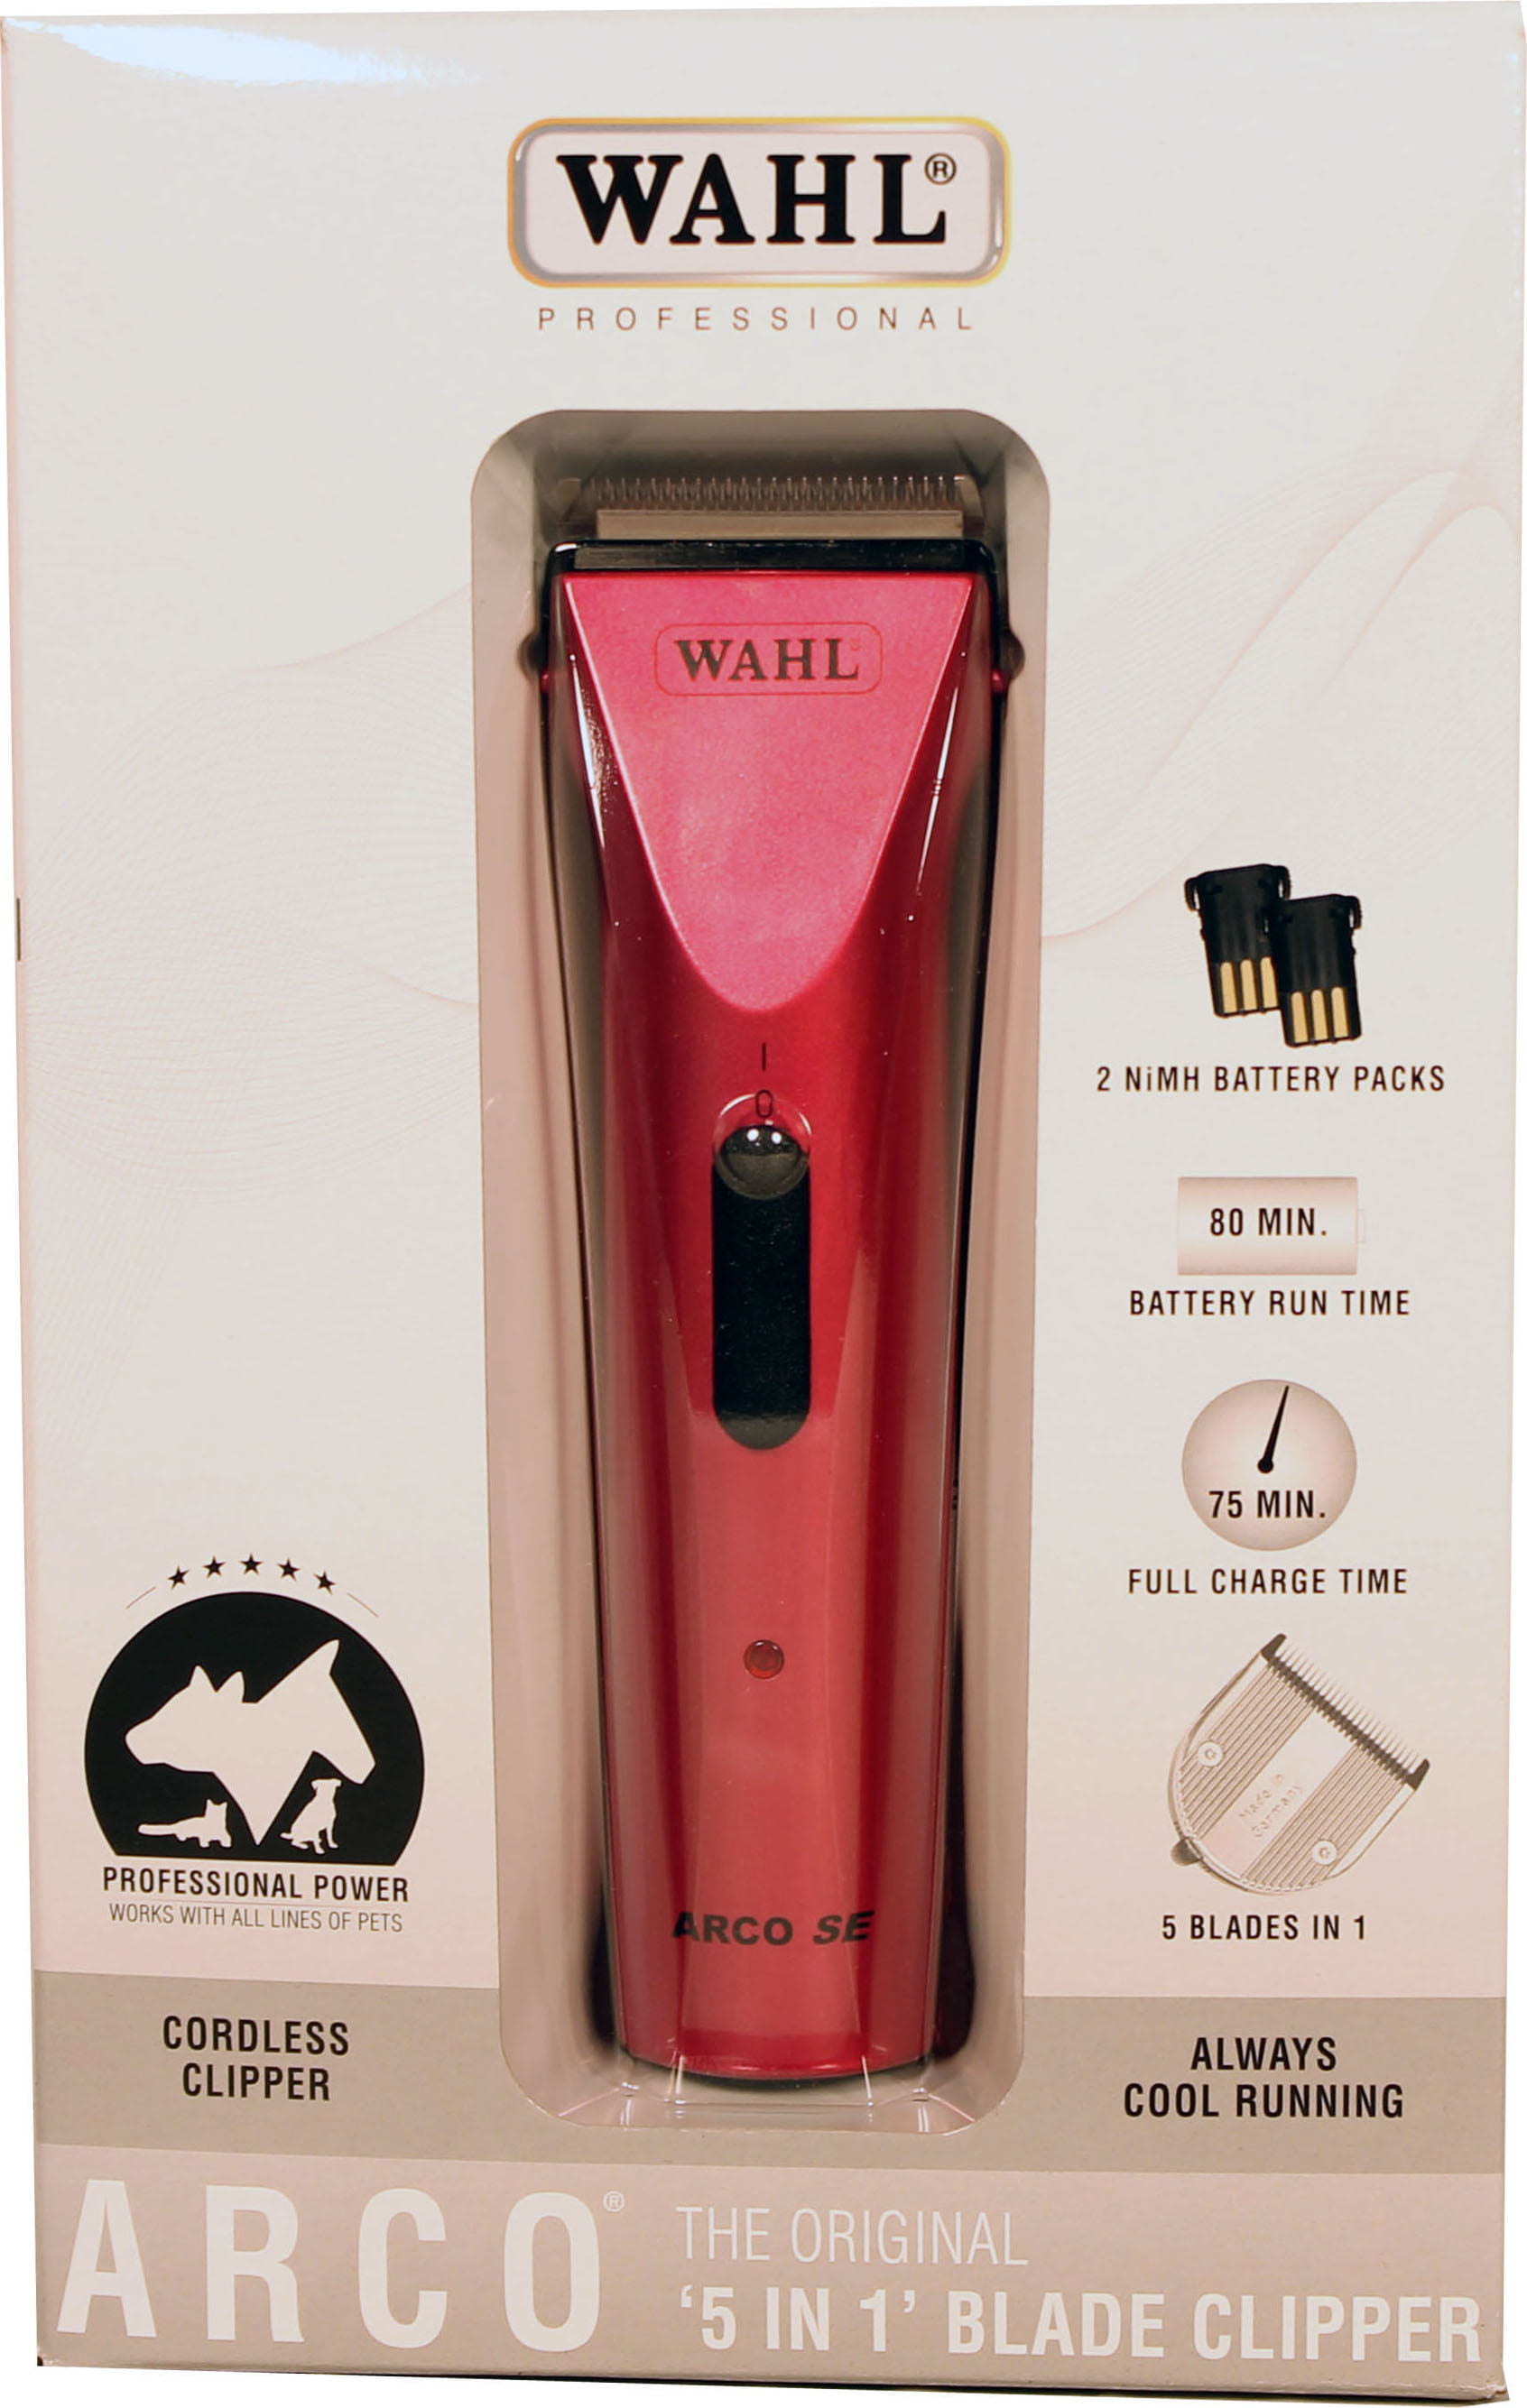 wahl arco se battery